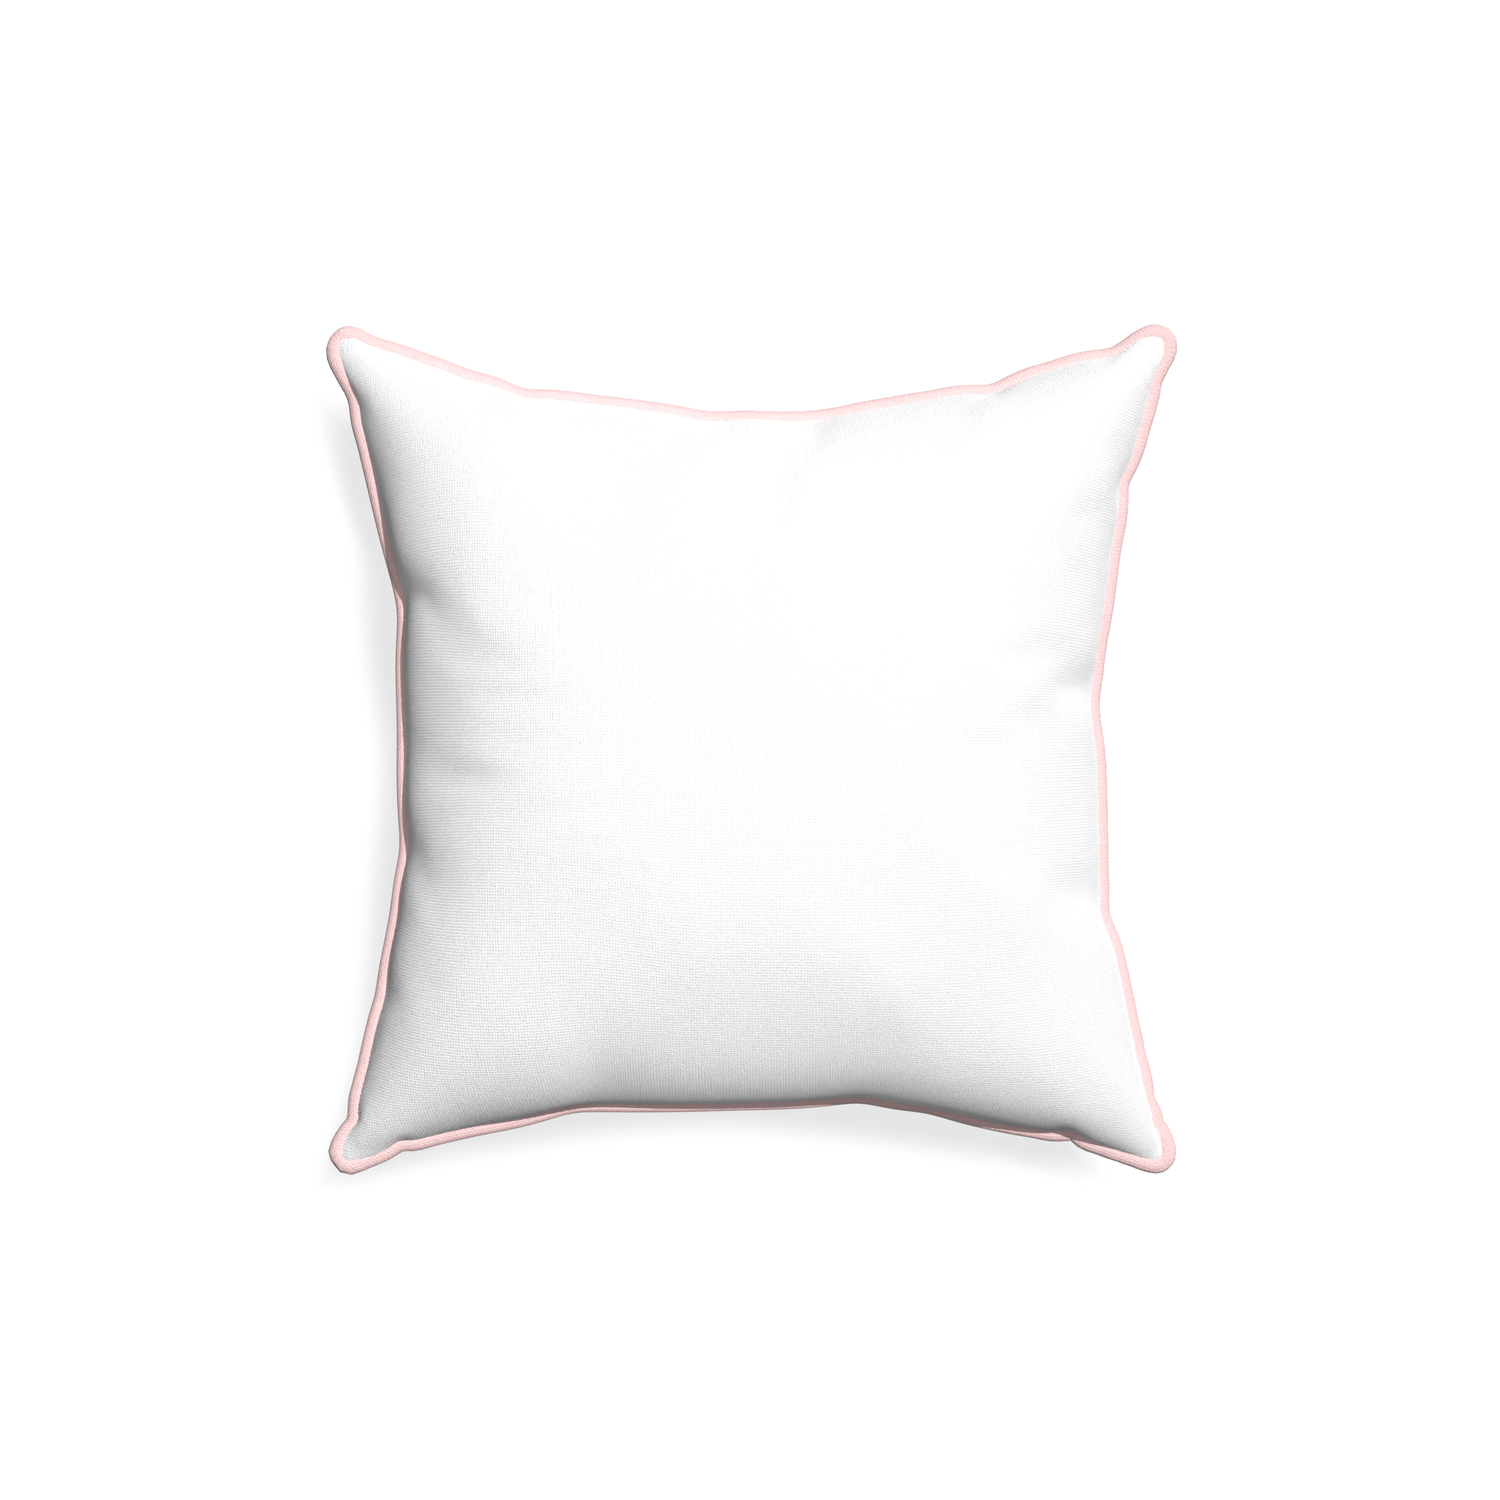 18-square snow custom pillow with petal piping on white background